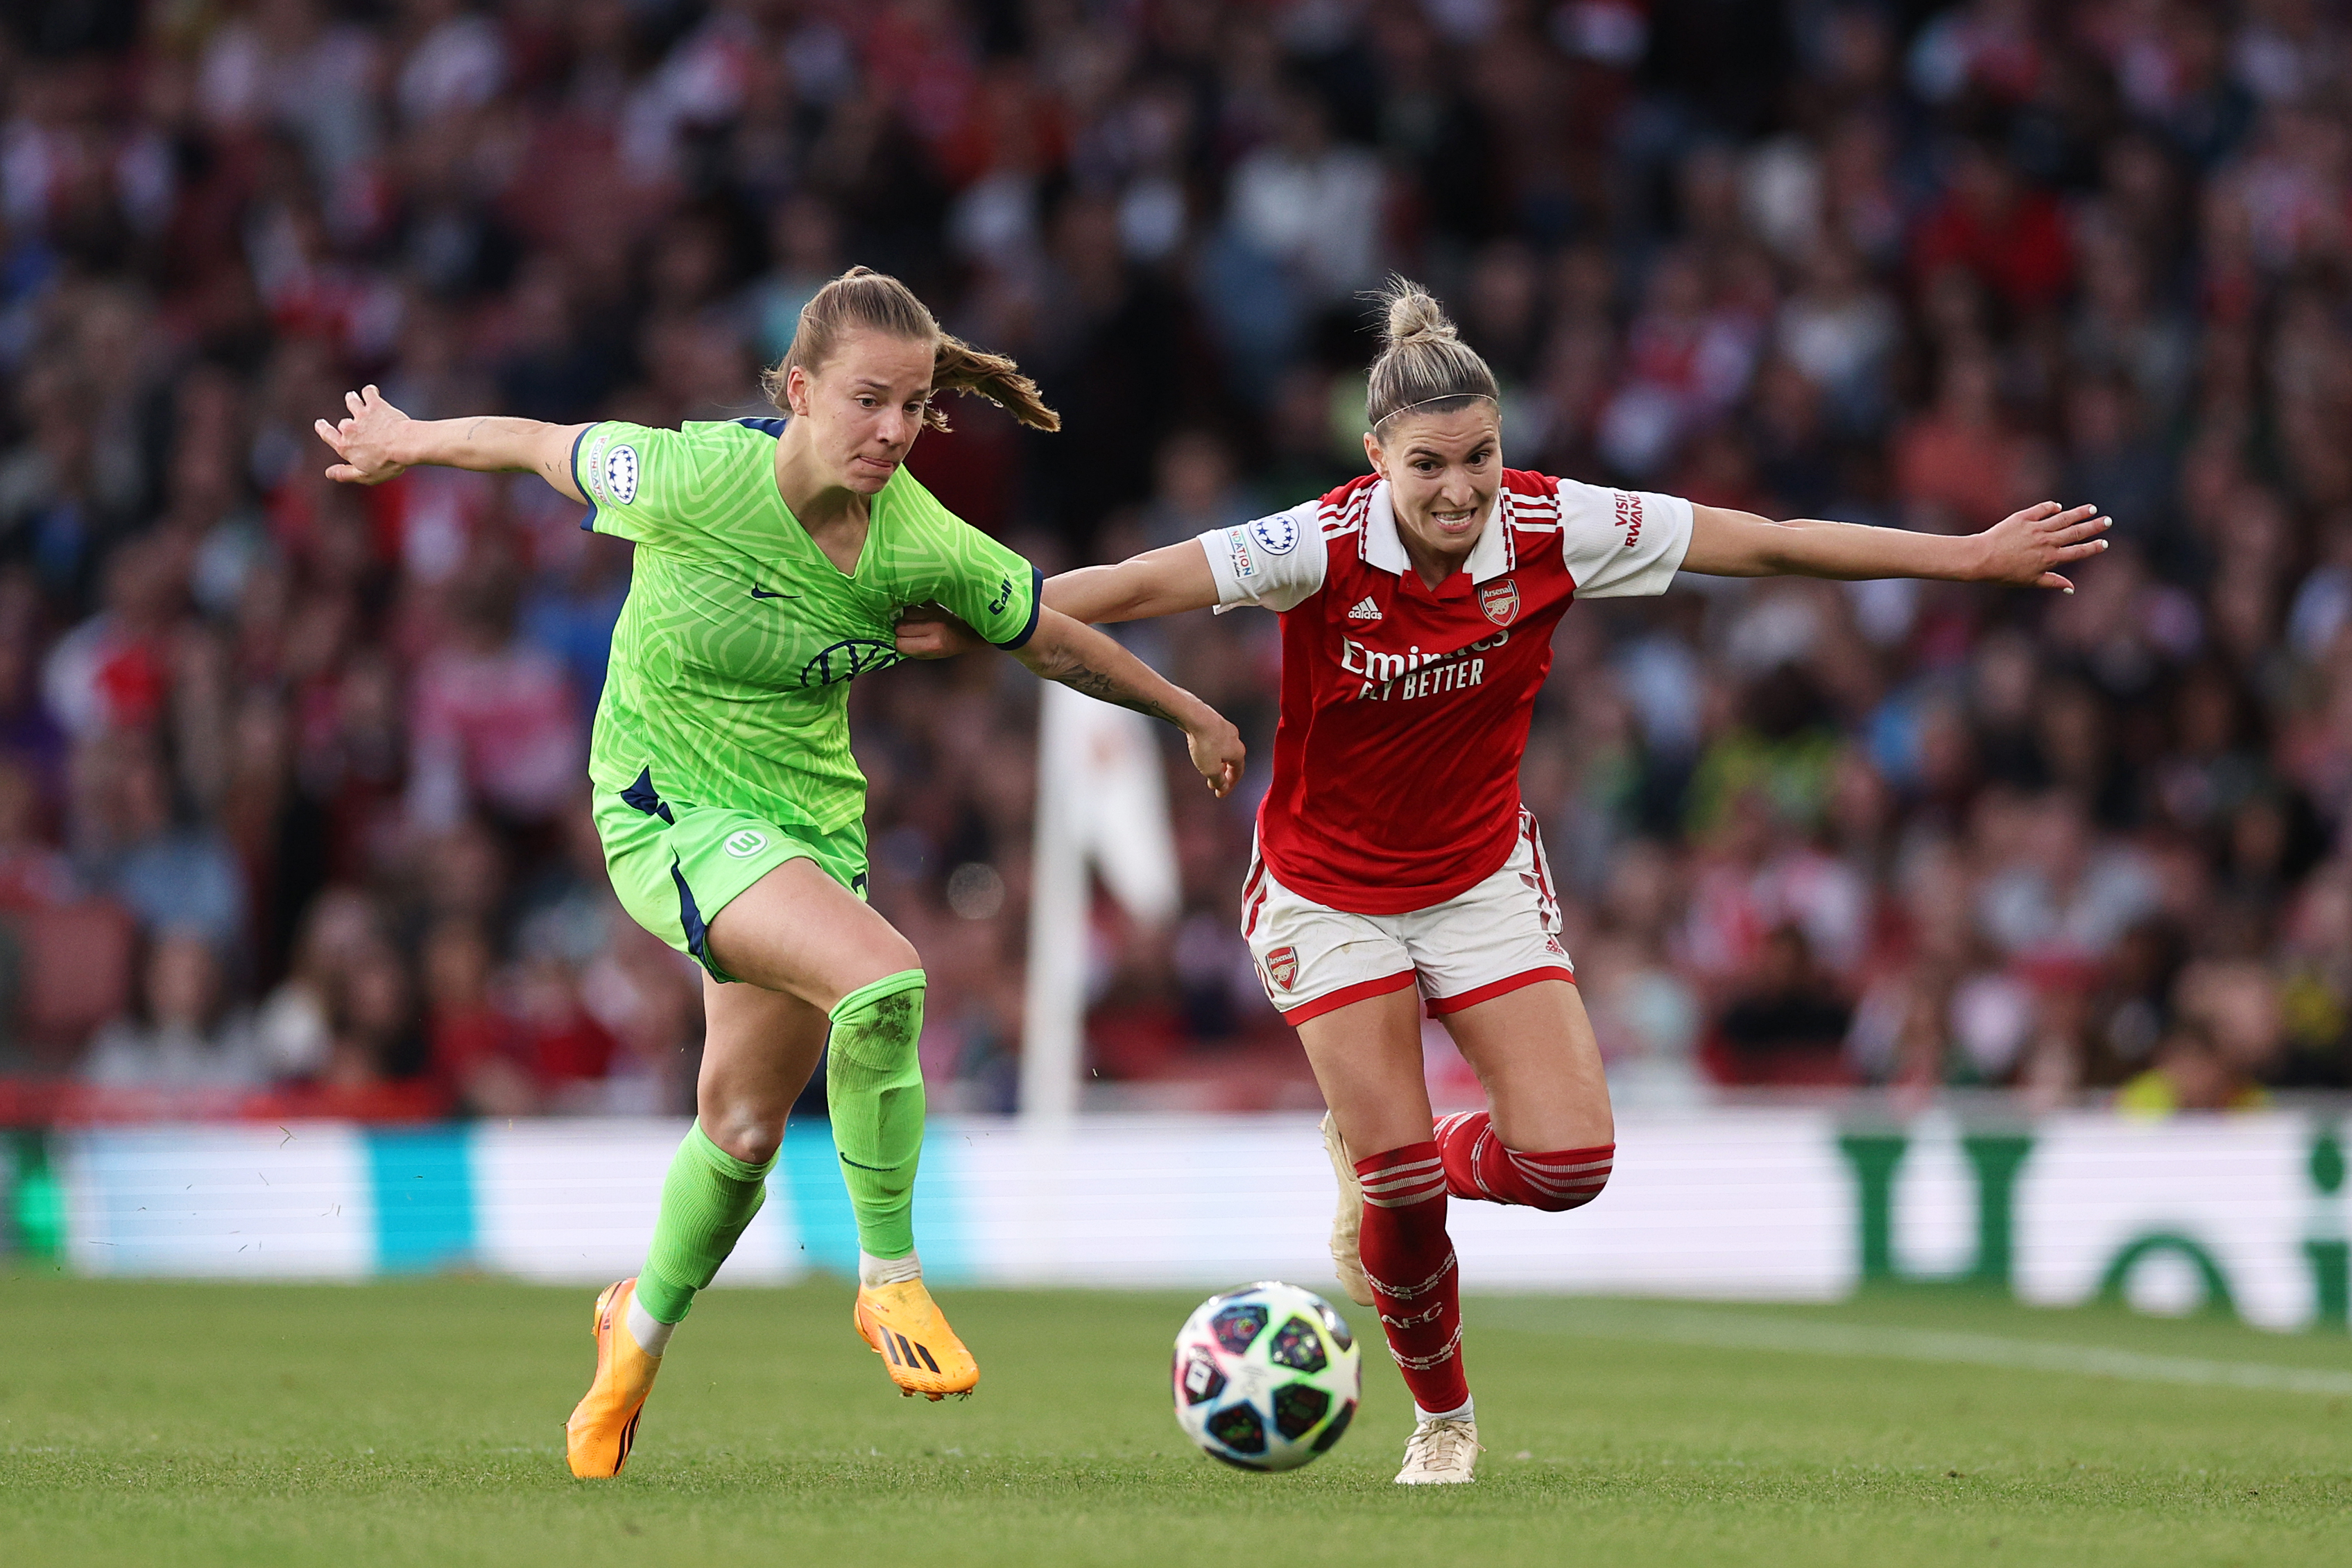 Arsenal close in on Women's Champions League quarter-finals after